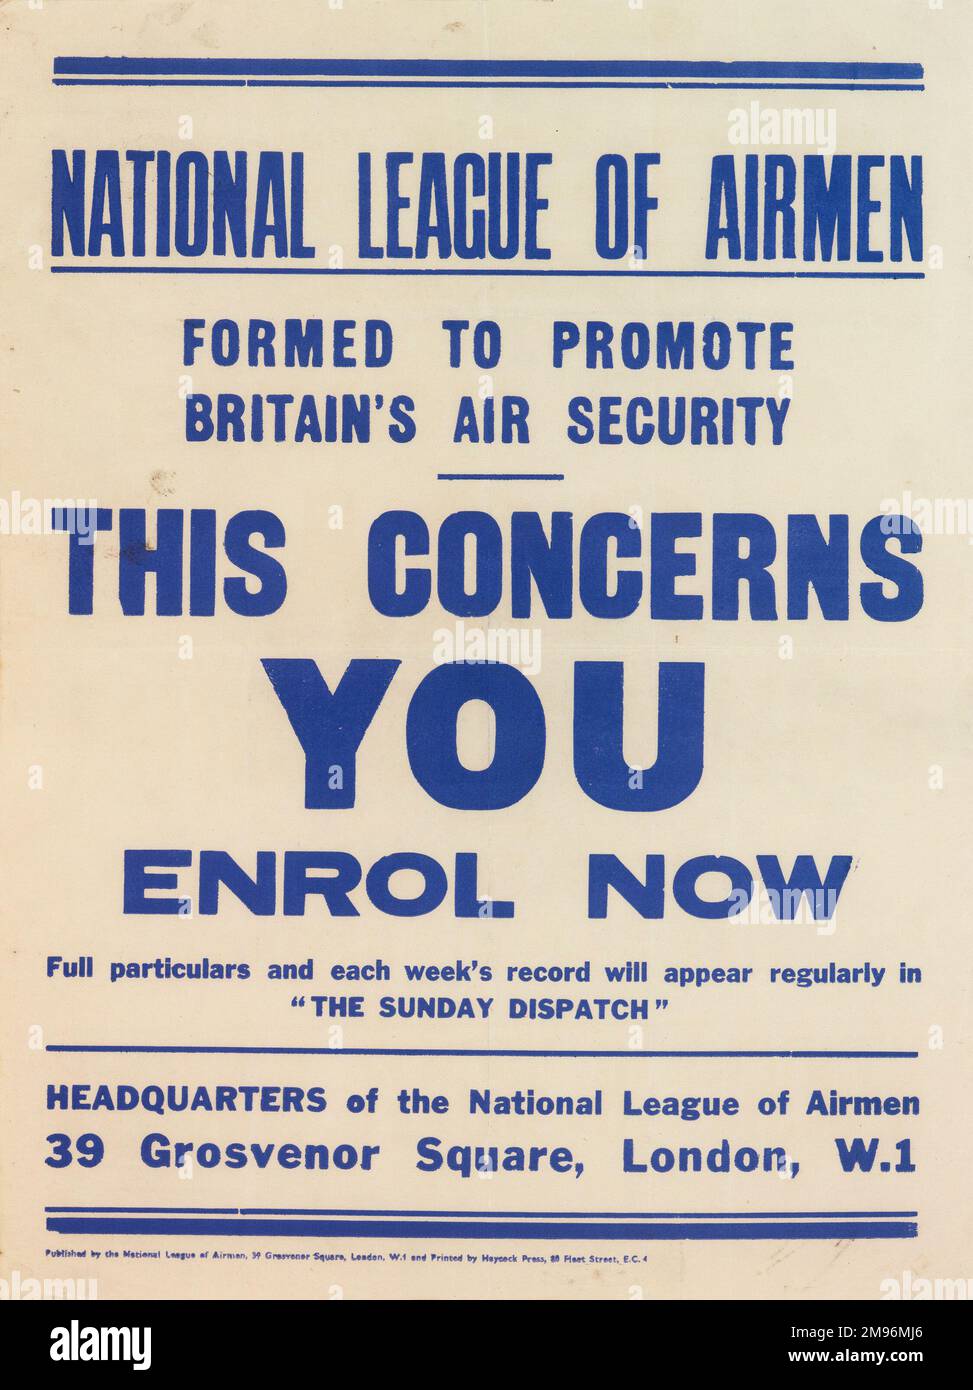 Poster, National League of Airmen, formed to promote Britain's air security.  This Concerns You, Enrol Now. Stock Photo